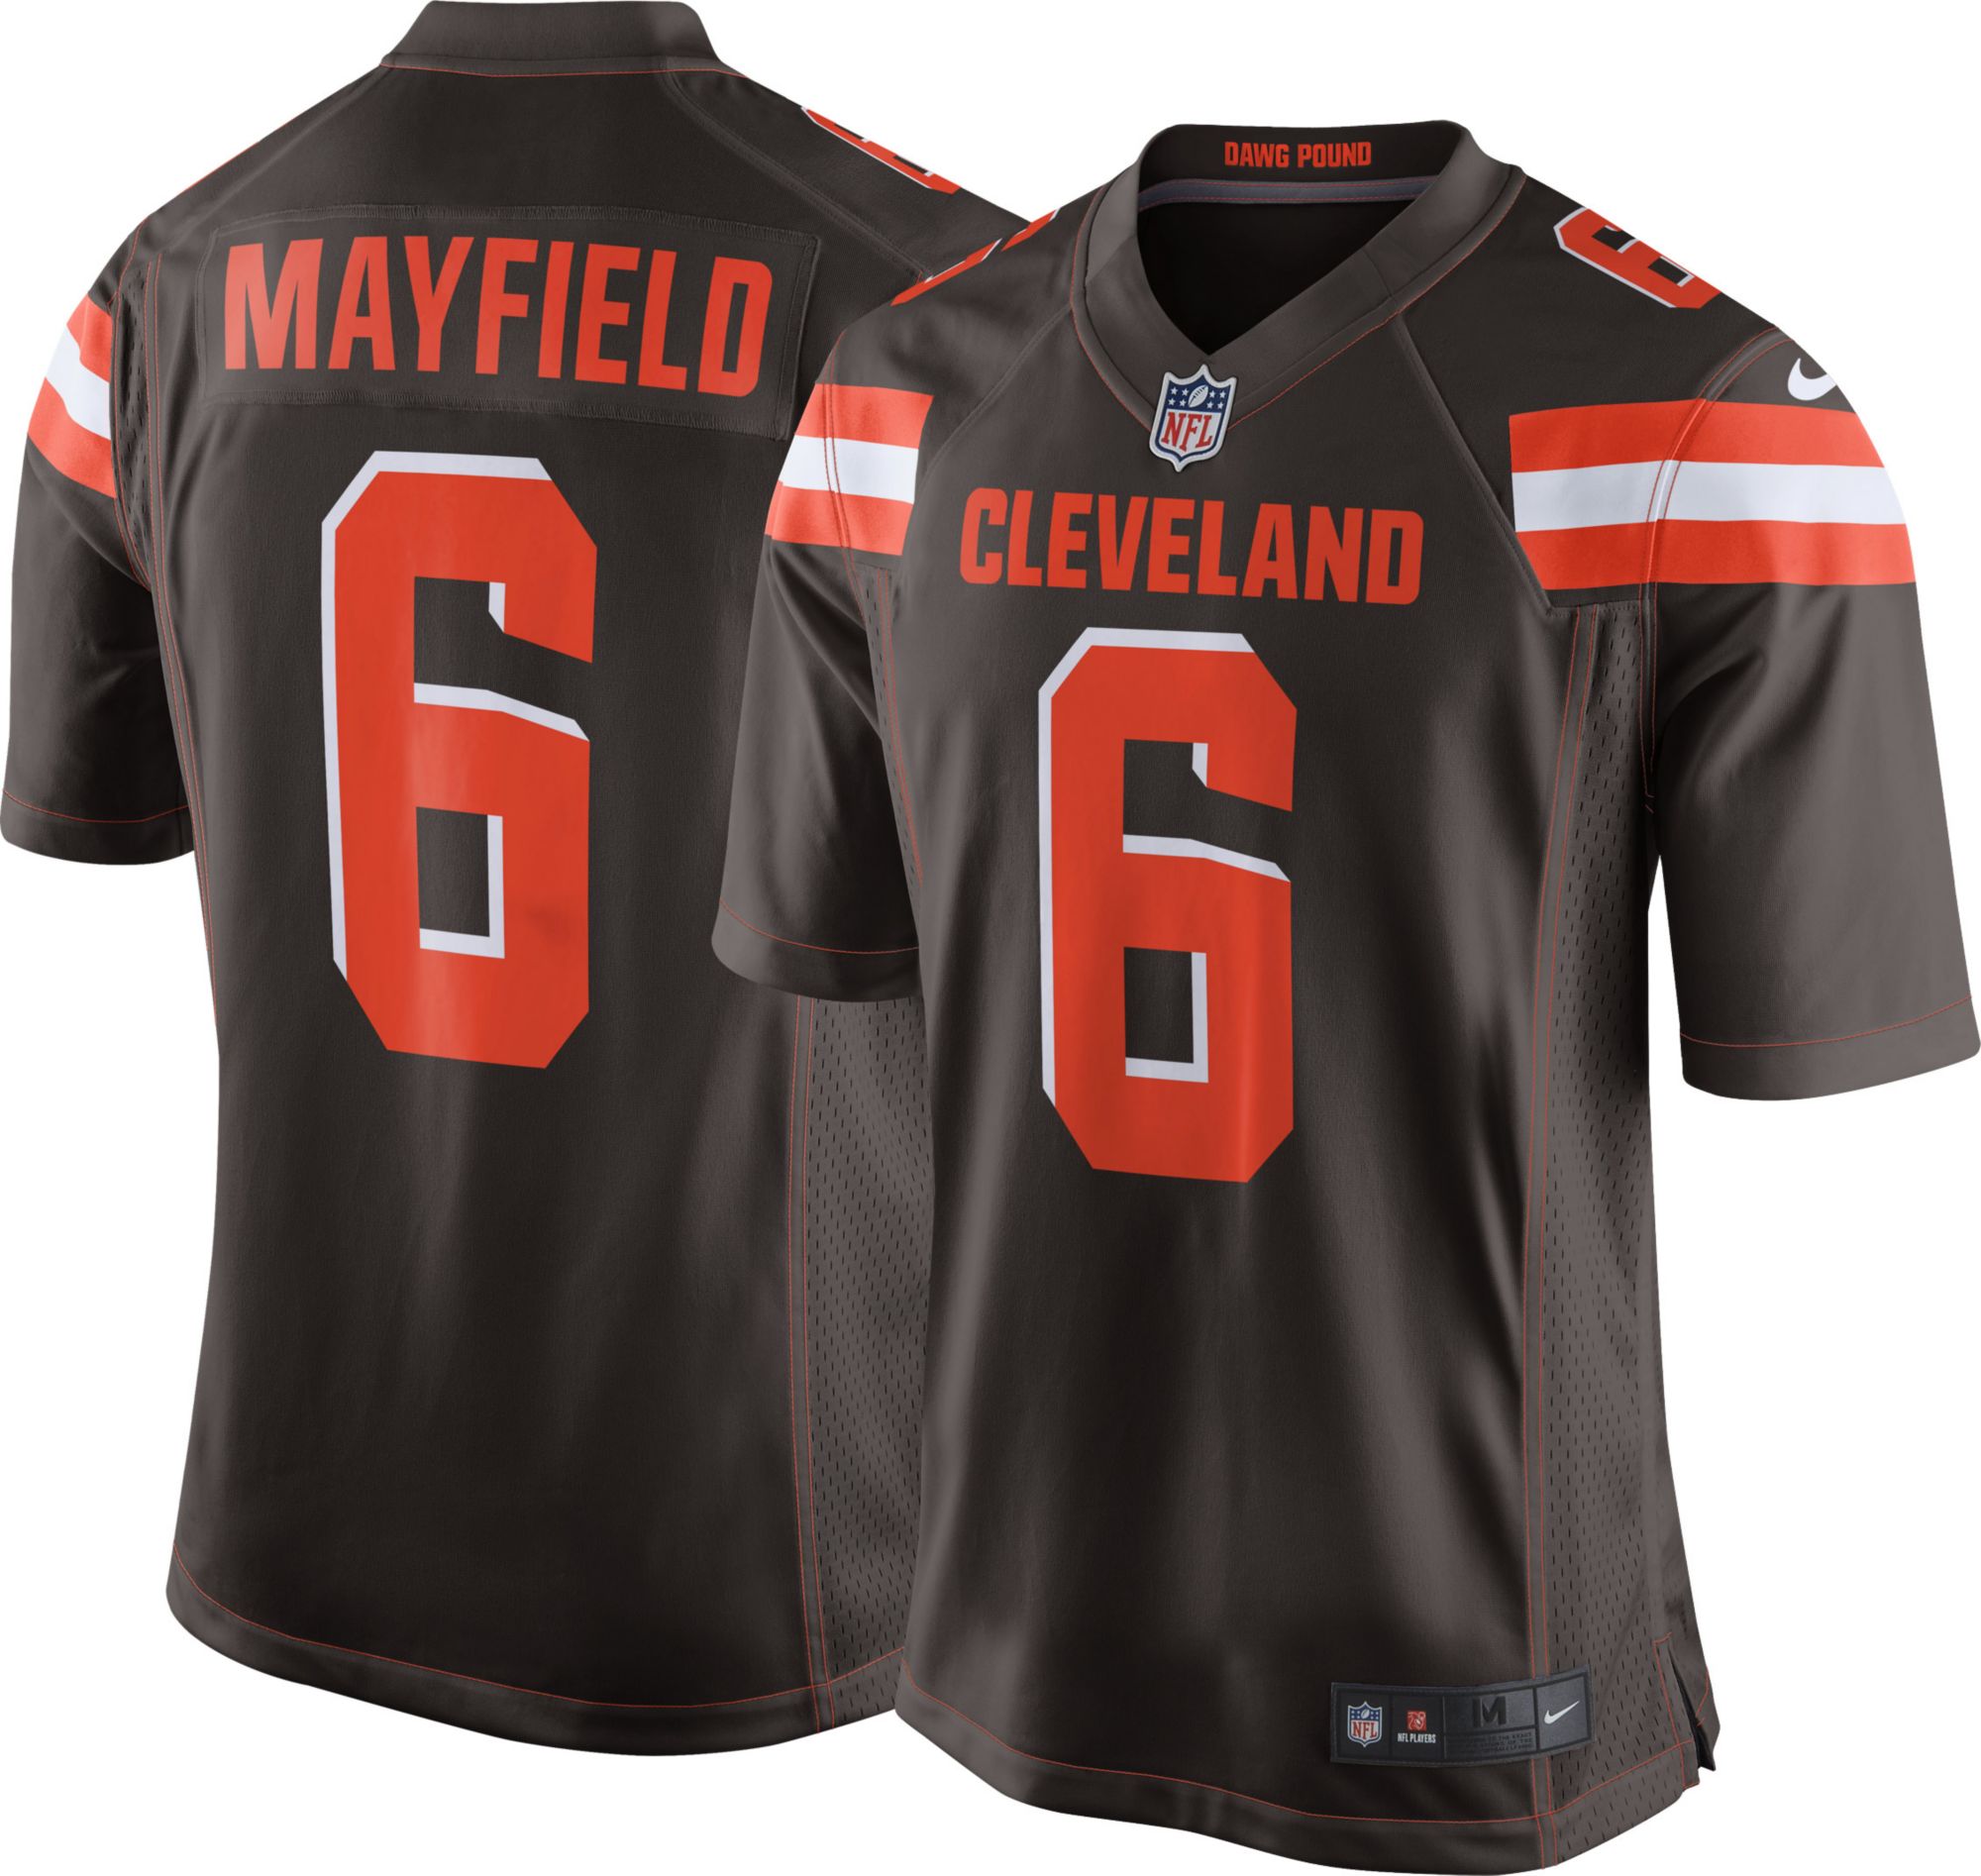 baker mayfield jersey unsigned